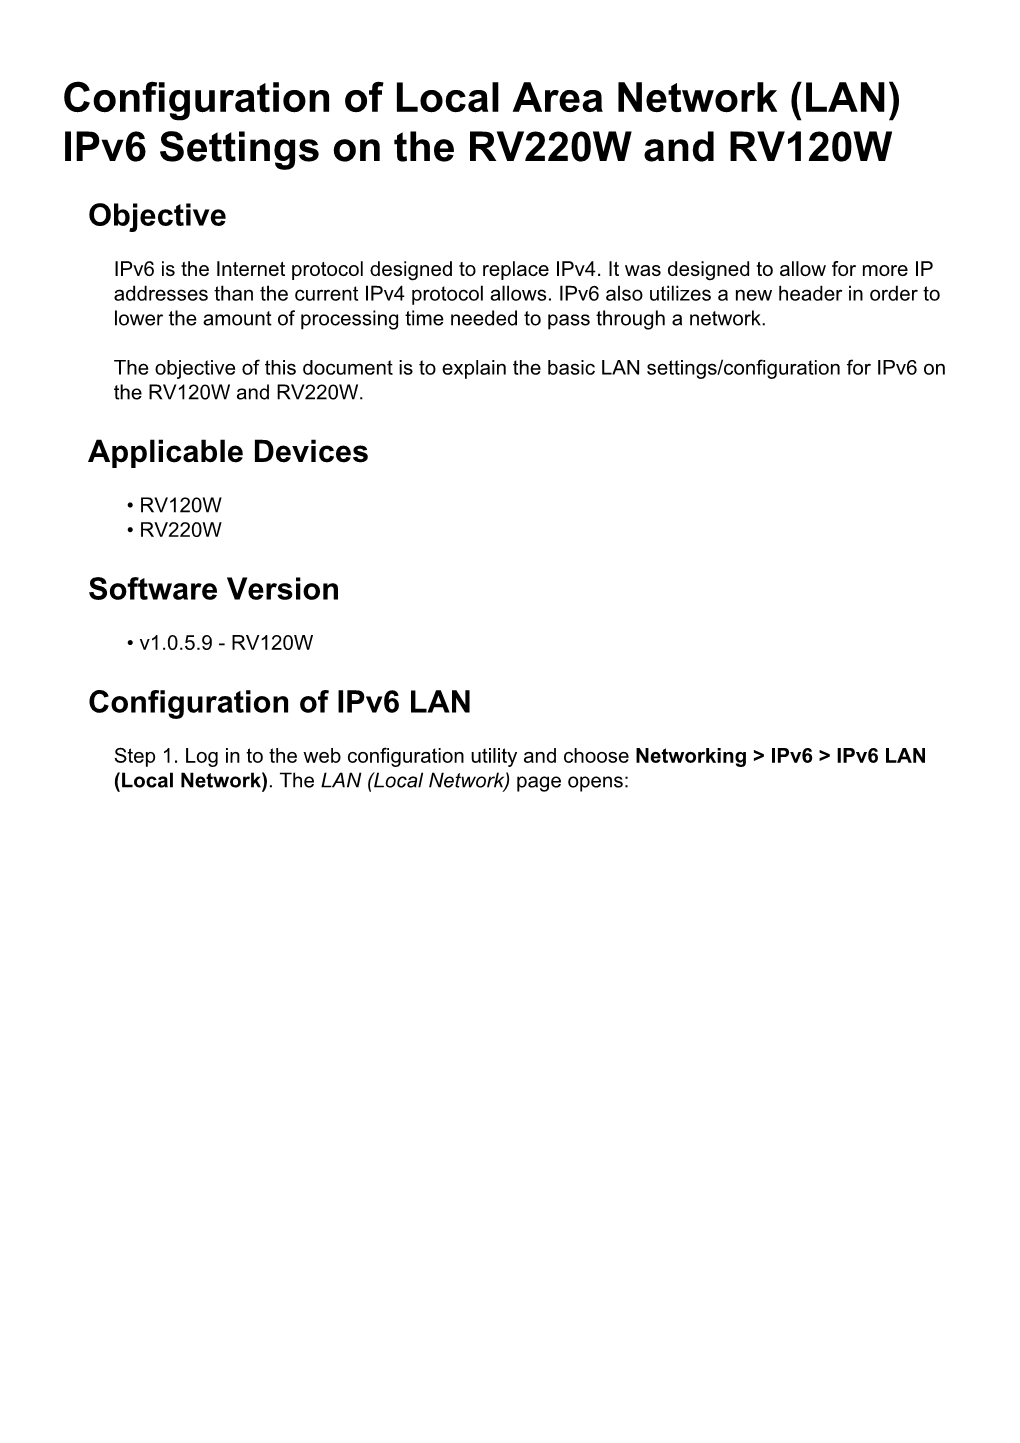 Configuration of Local Area Network (LAN) Ipv6 Settings on the RV220W and RV120W